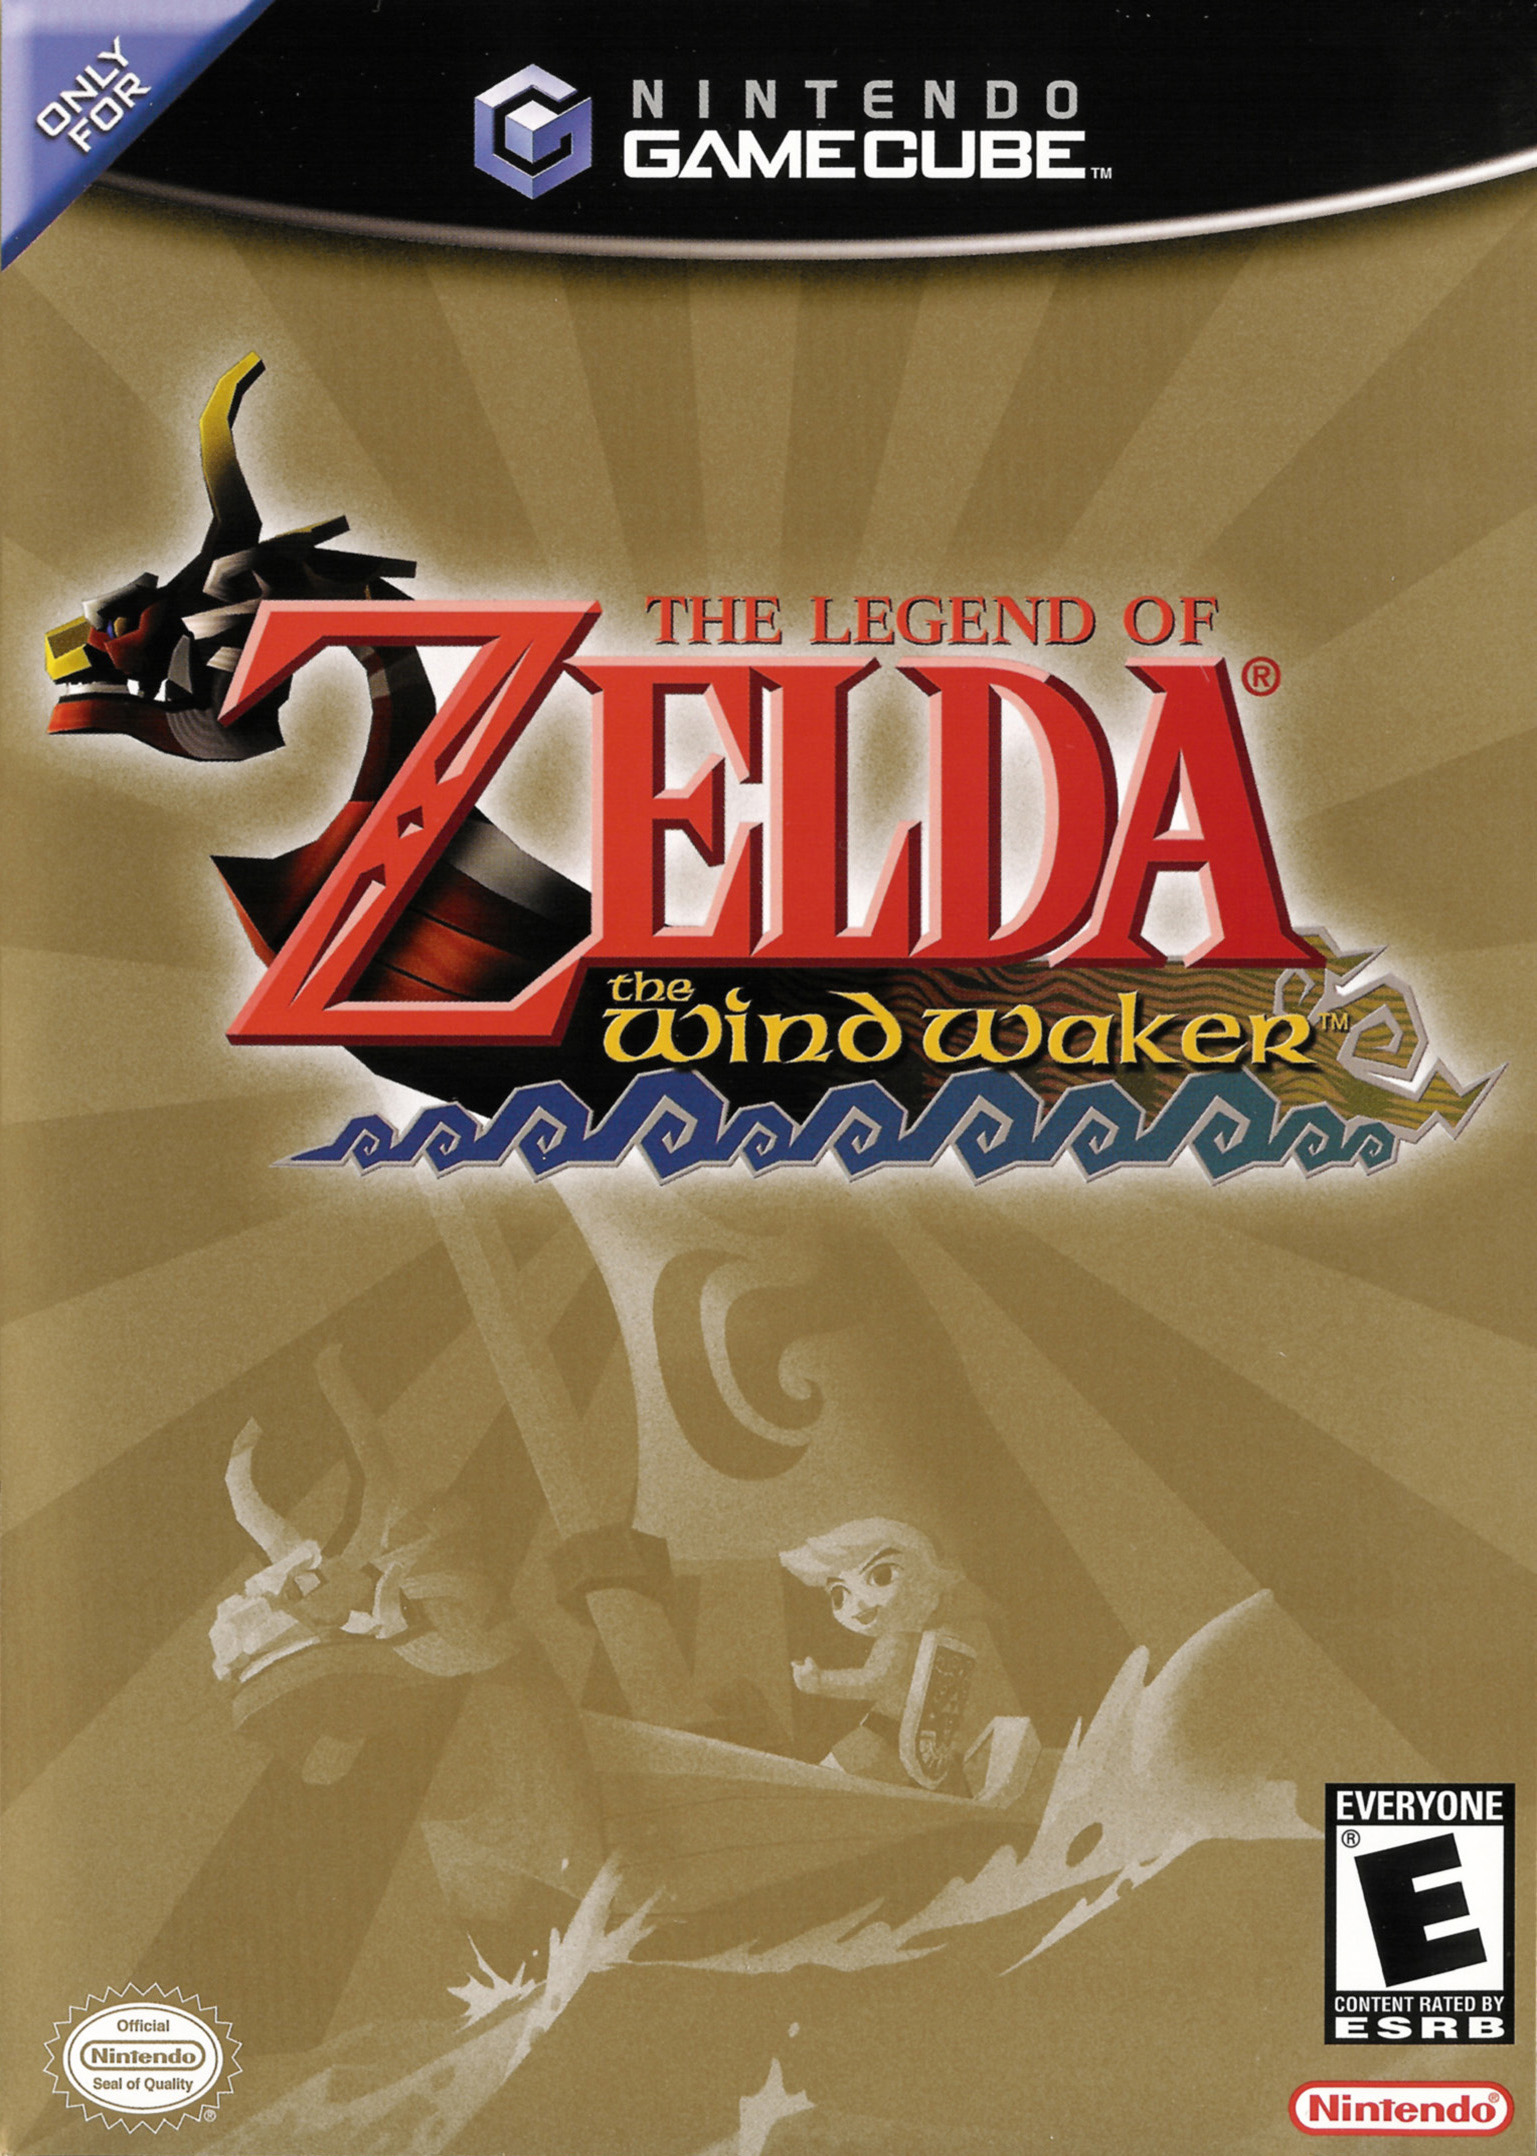 The Legend Of Zelda The Wind Waker Strategywiki The Video Game Walkthrough And Strategy Guide Wiki